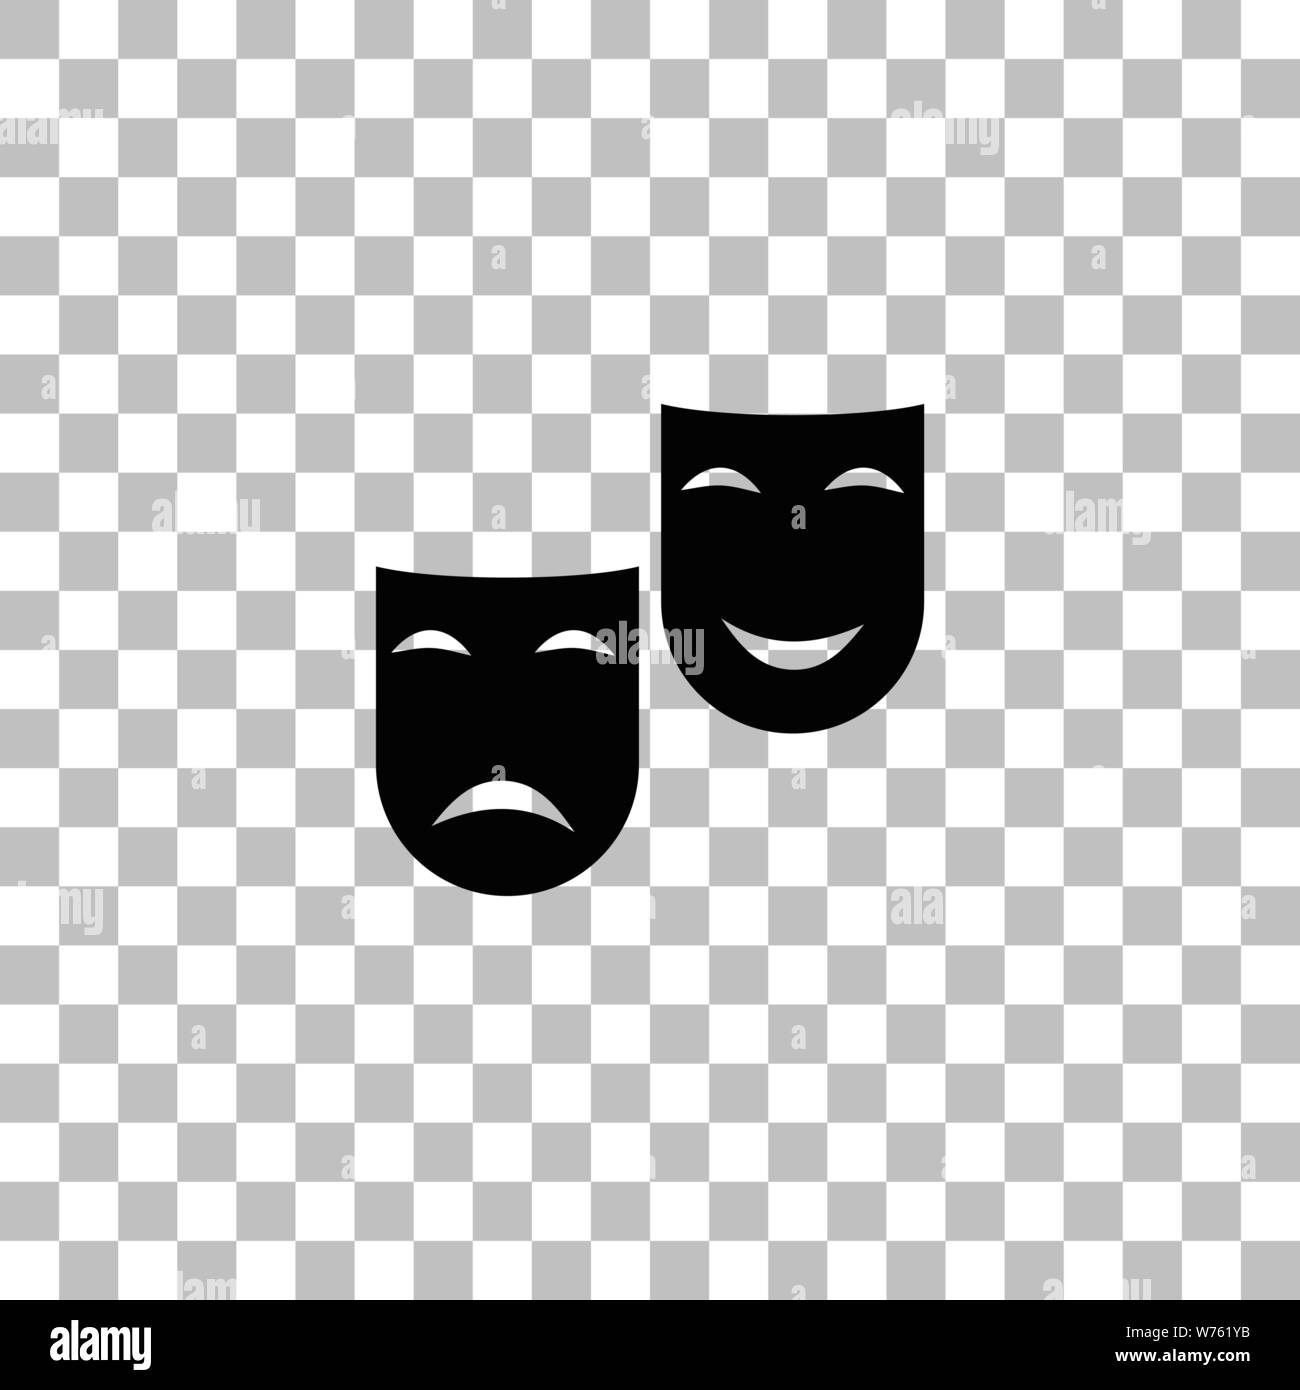 Comedy and tragedy theatrical masks. Black flat icon on a transparent background. Pictogram for your project Stock Vector